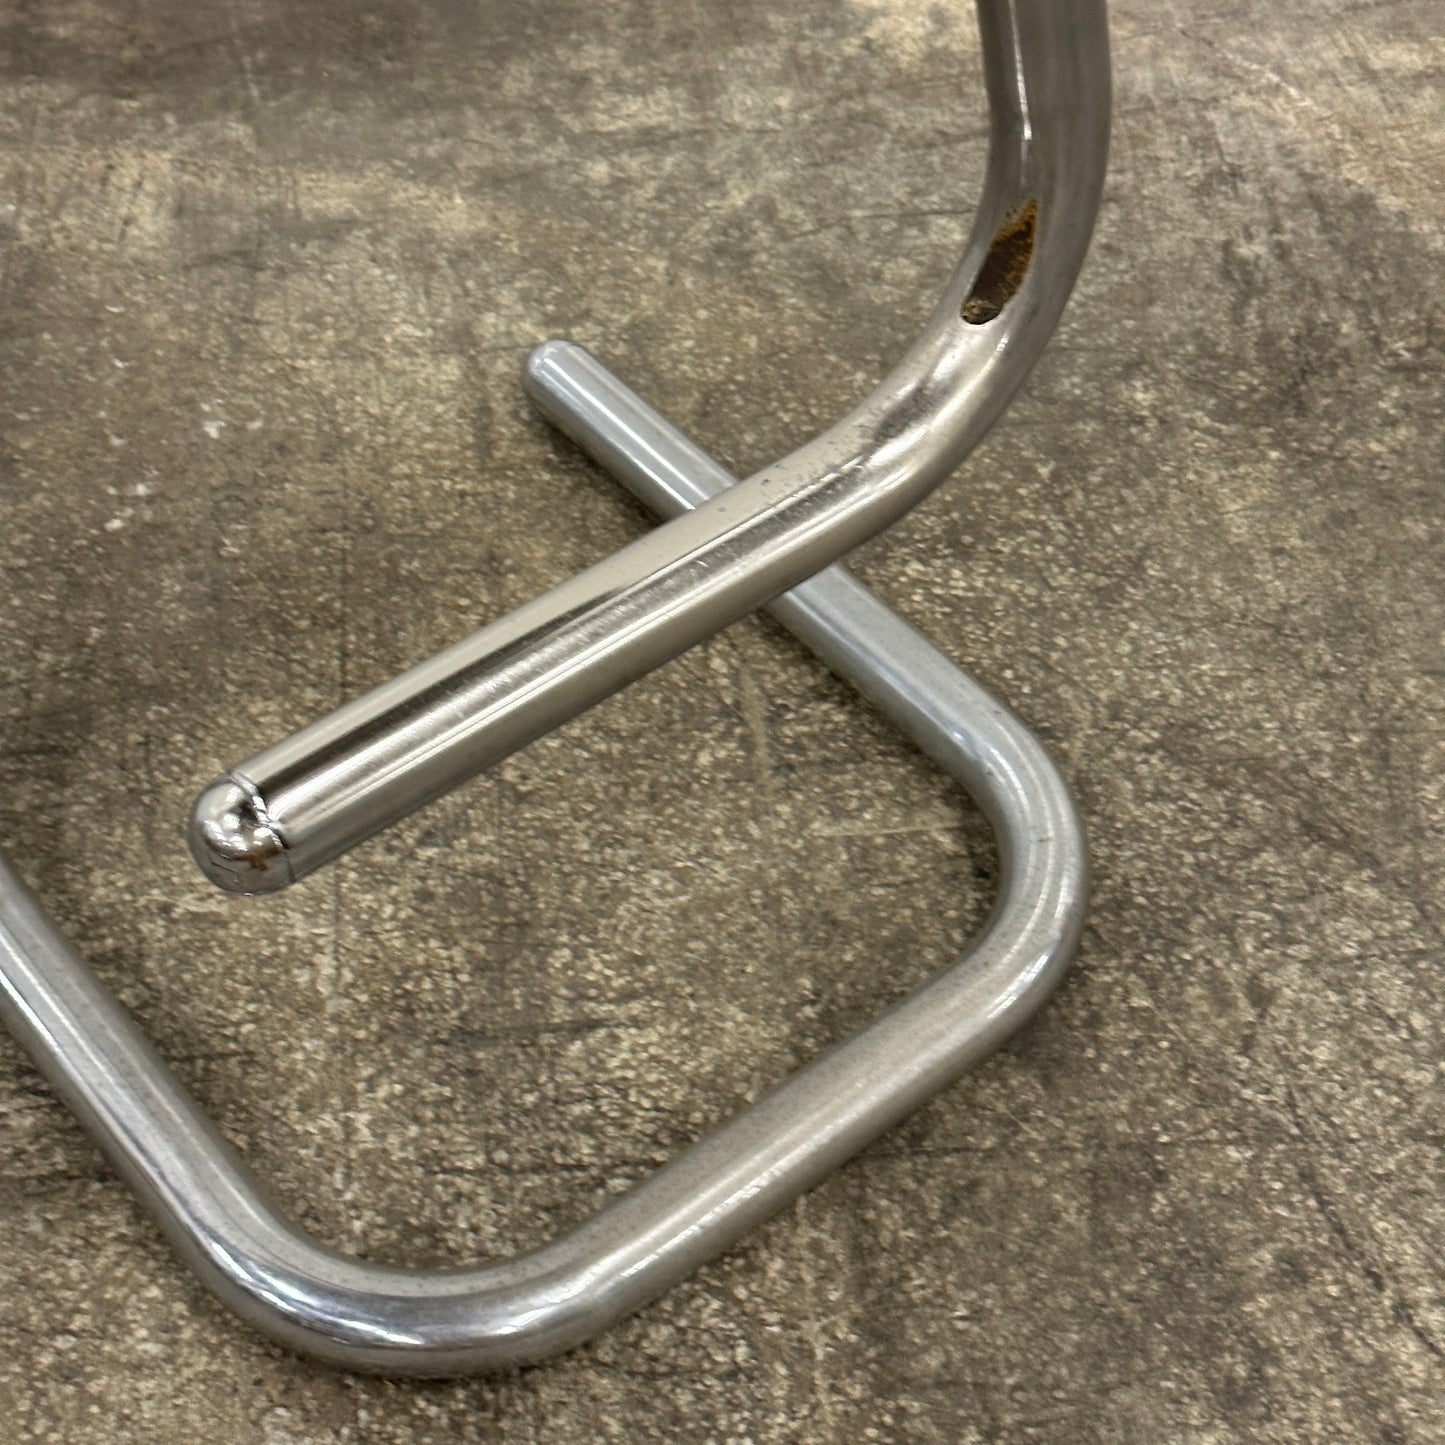 Paperclip Stools by Kinetics